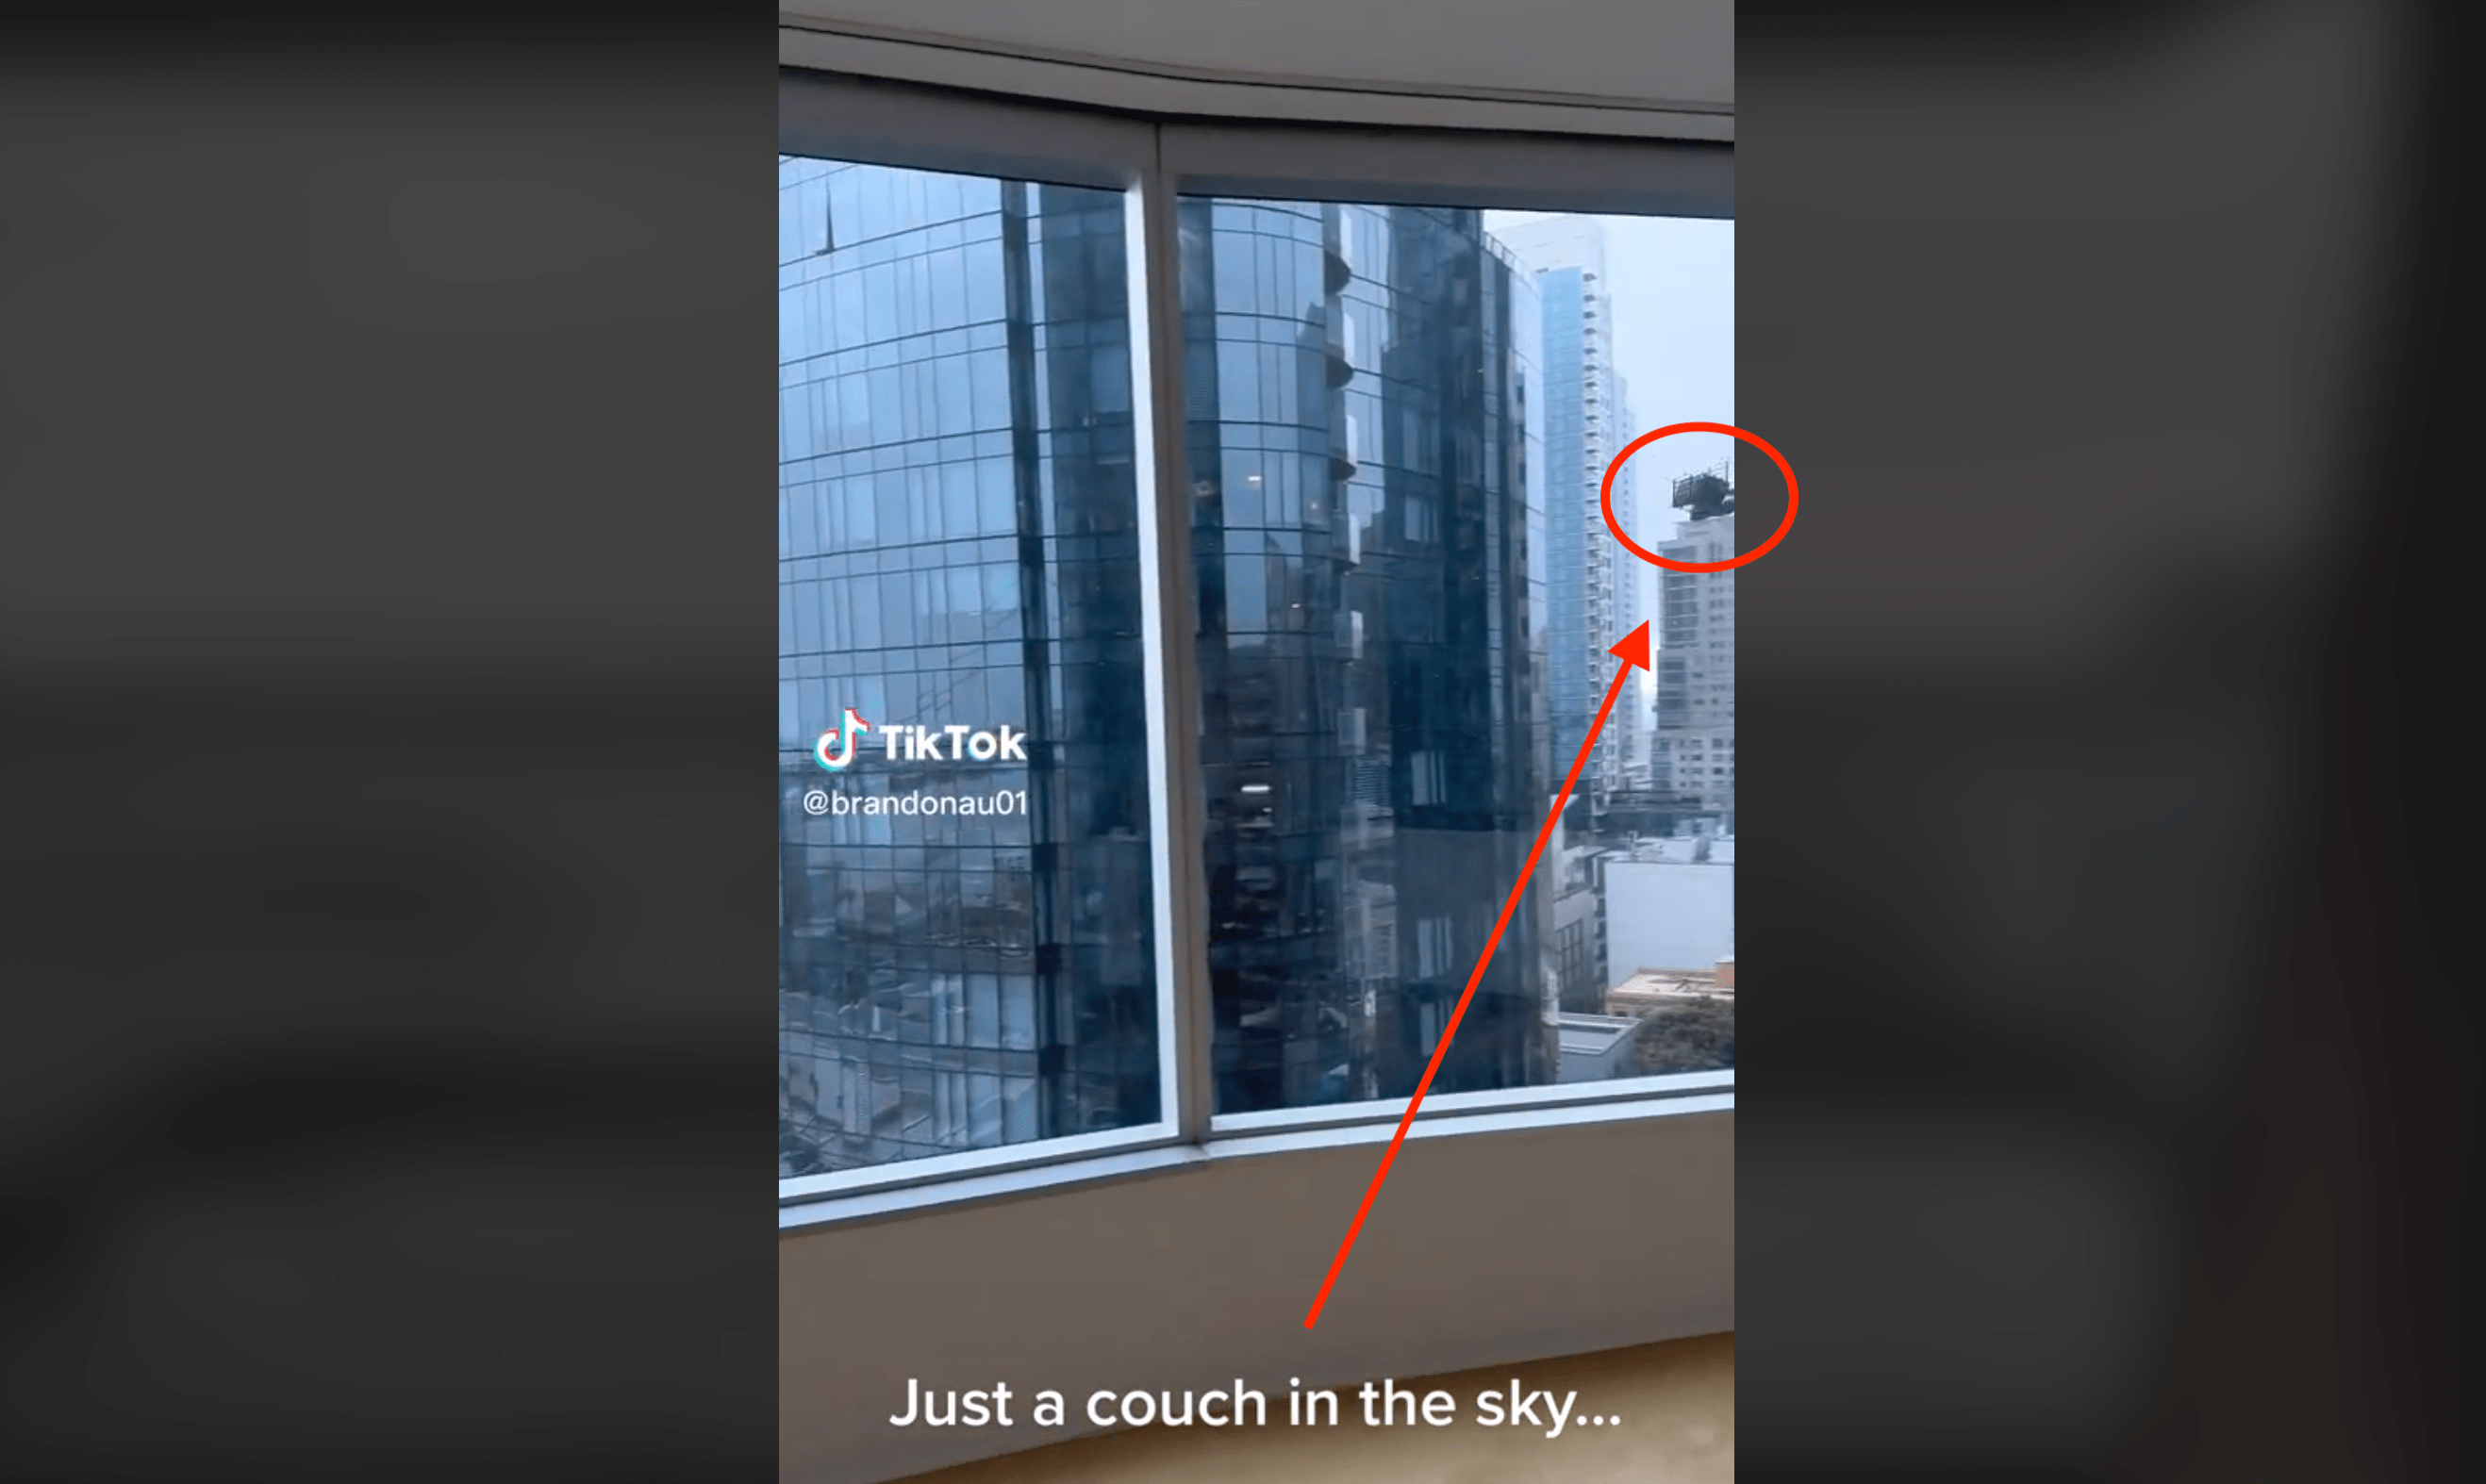 Watch: Video appears to show couch flying through skies of SF